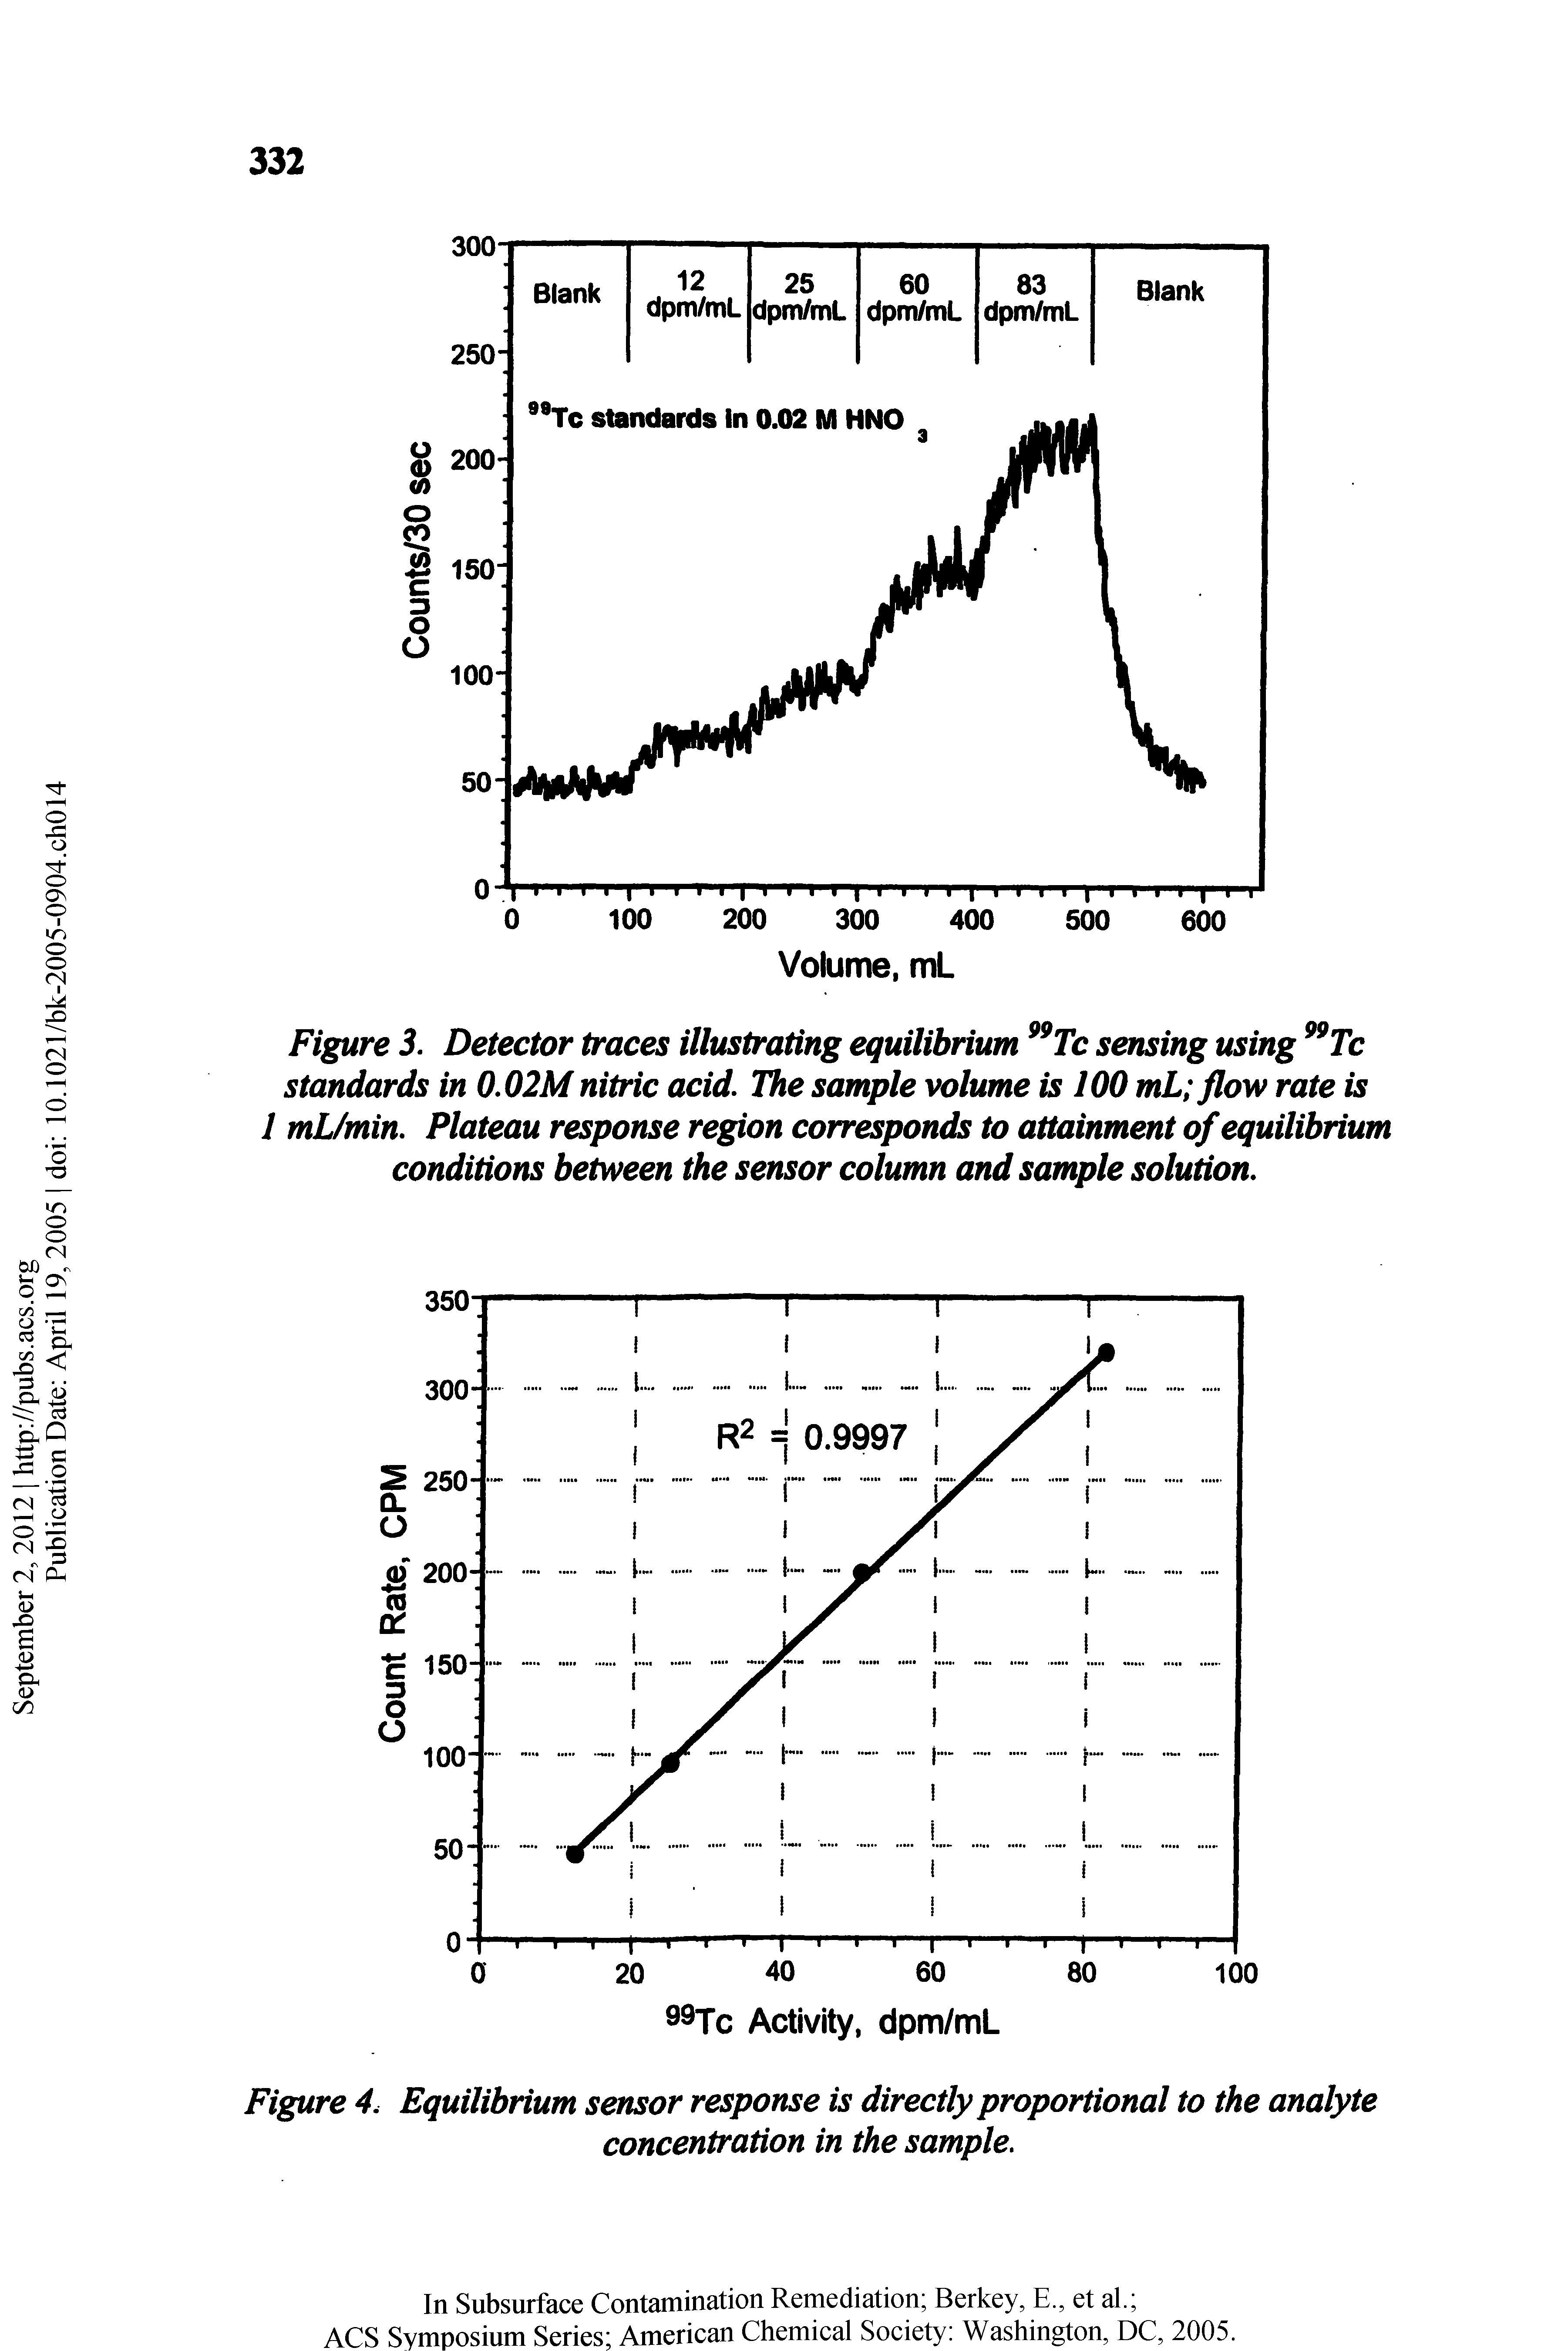 Figure 3. Detector traces illustrating equilibrium Tc sensing using Tc standards in 0.02M nitric acid. The sample volume is 100 mL flow rate is 1 mUmin. Plateau response region corresponds to attainment of equilibrium conditions between the sensor column and sample solution.